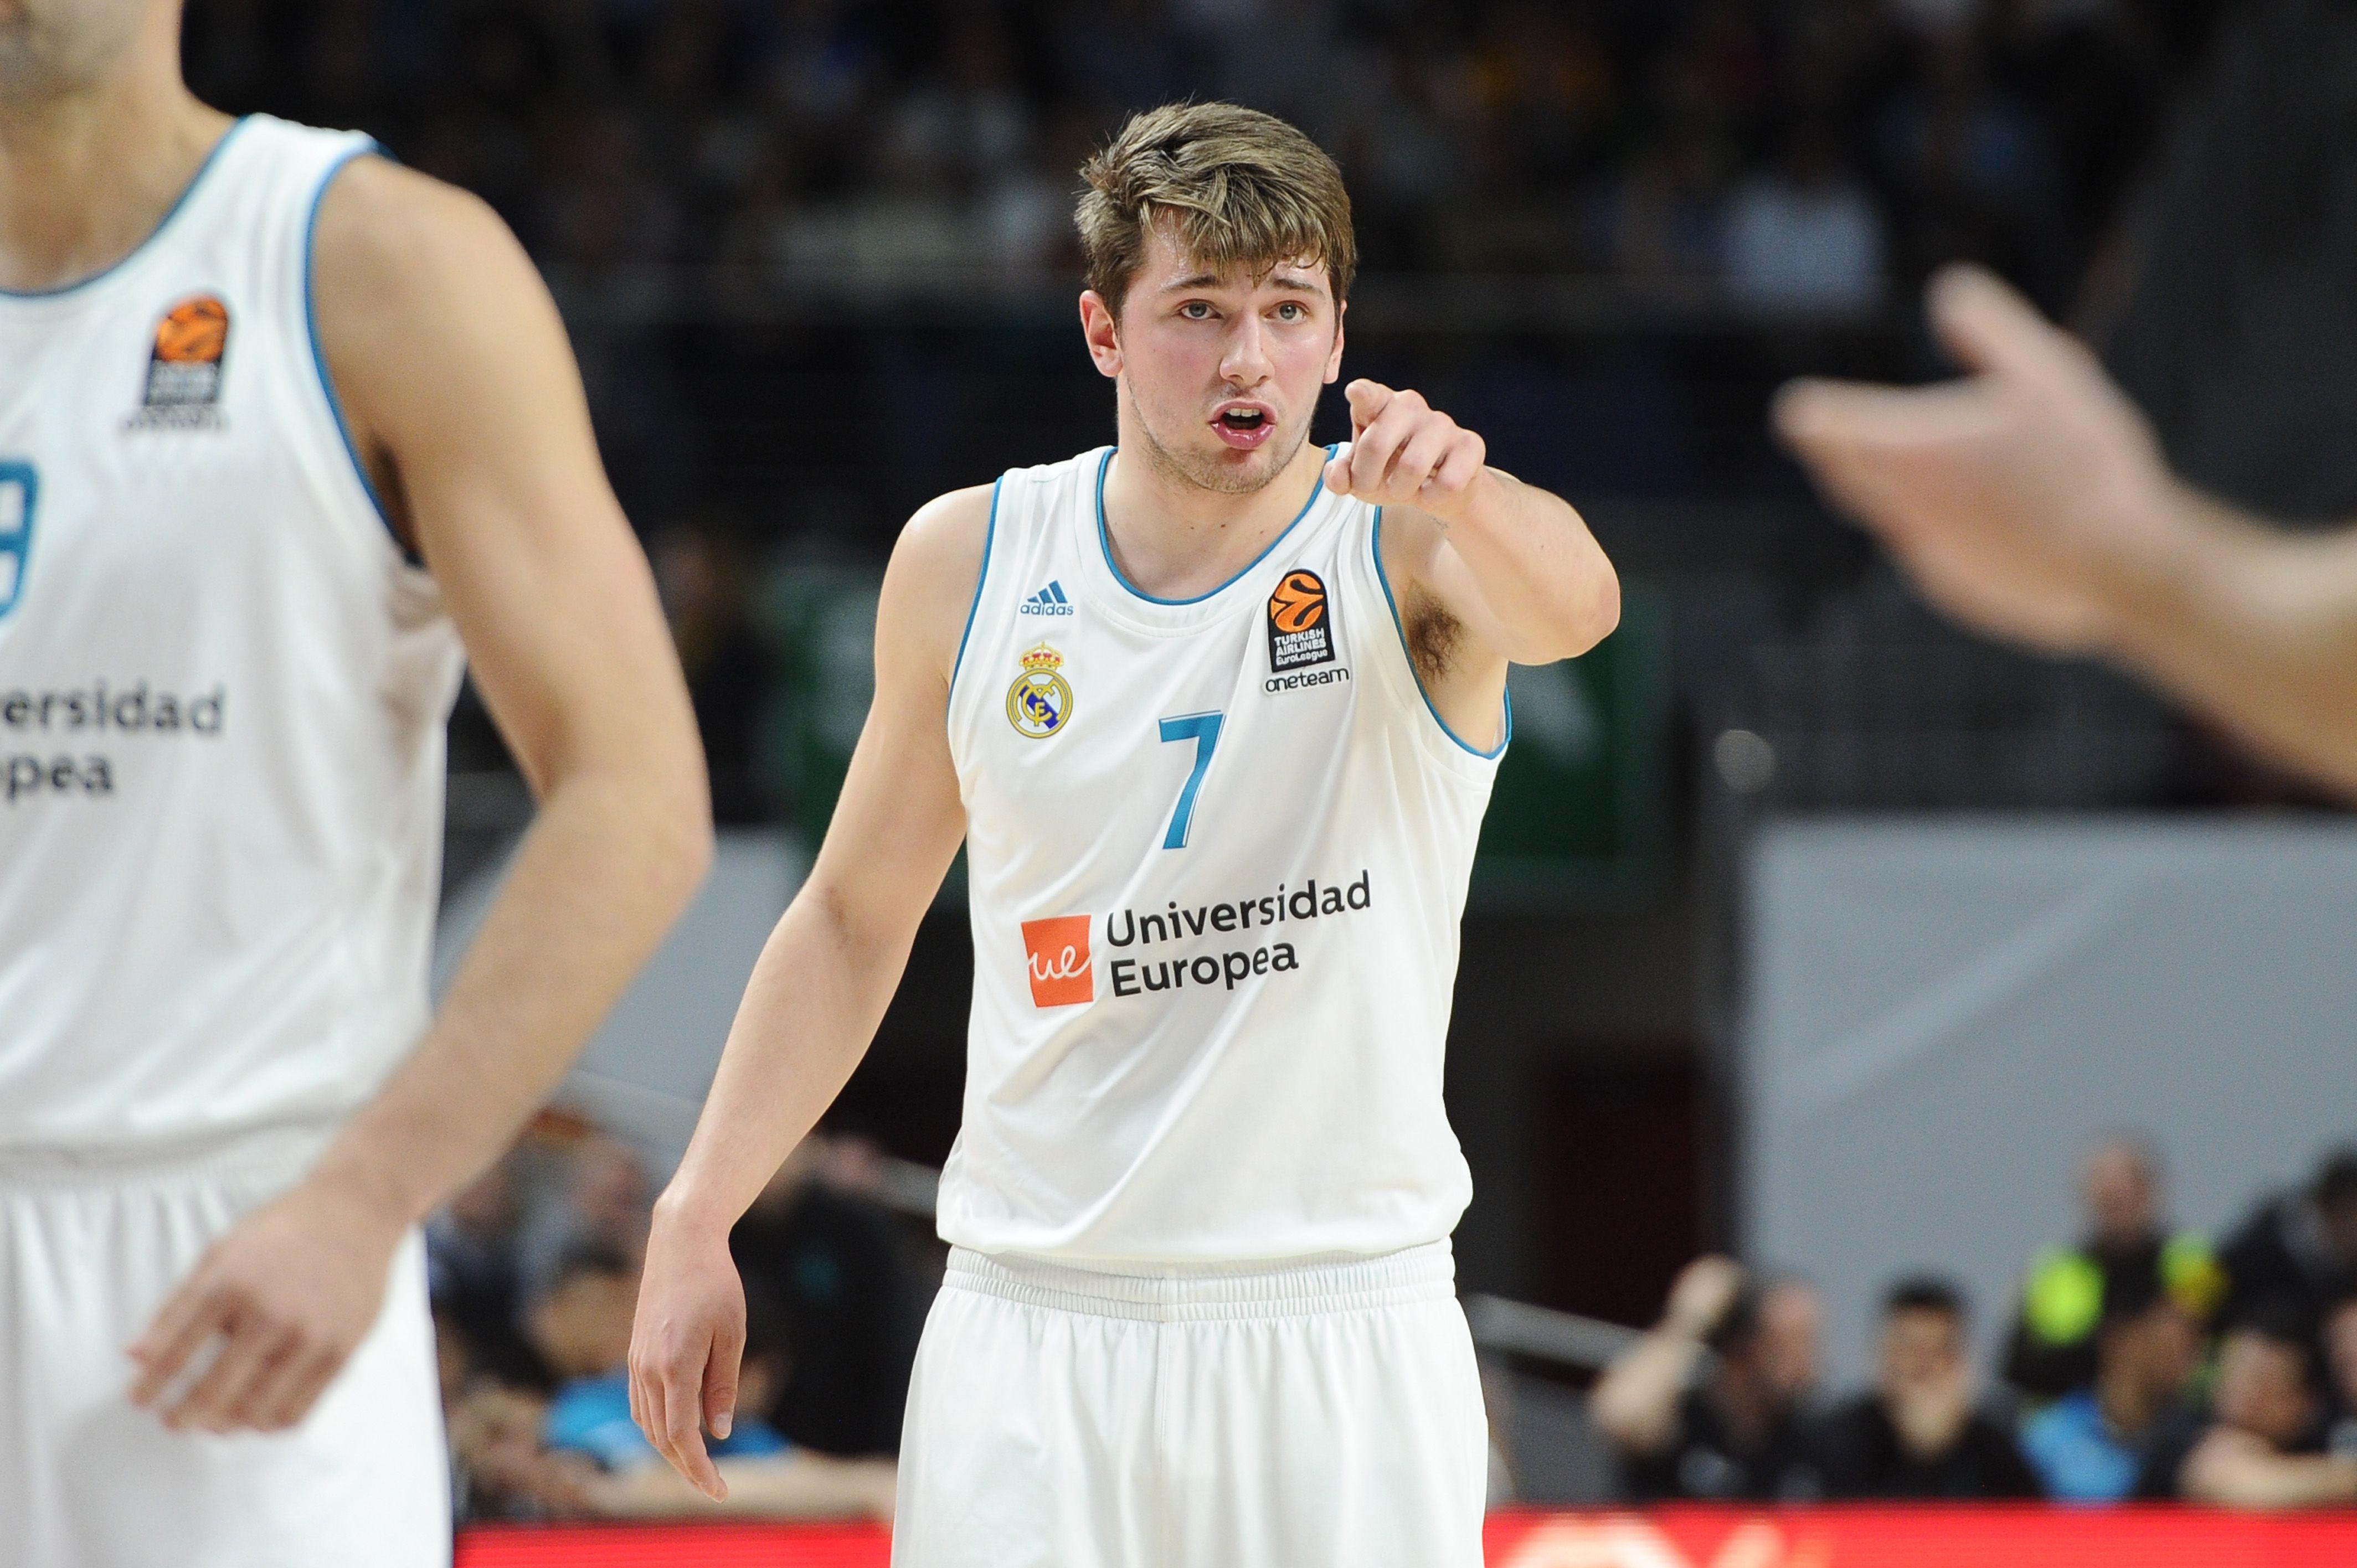 Phoenix Suns scouting: Luka Doncic is Europe's best of the Suns